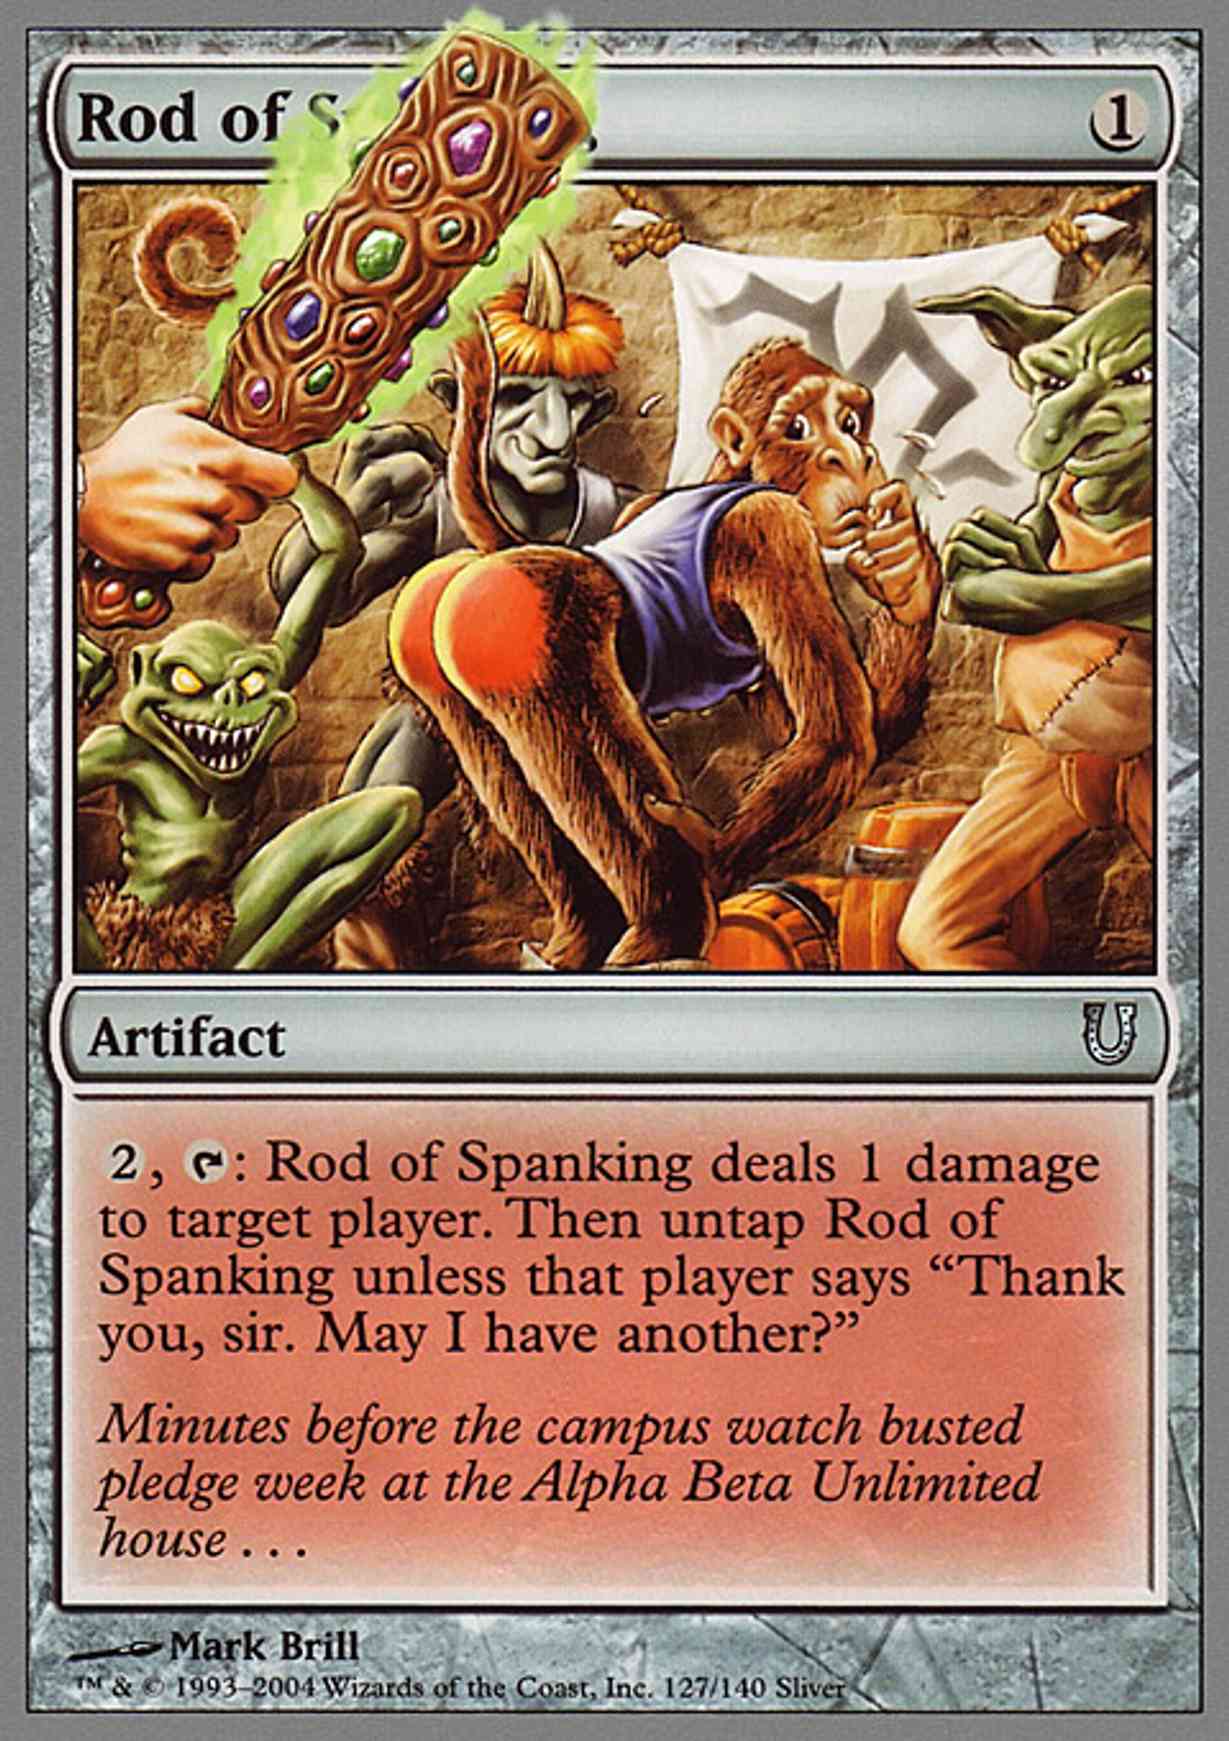 Rod of Spanking magic card front